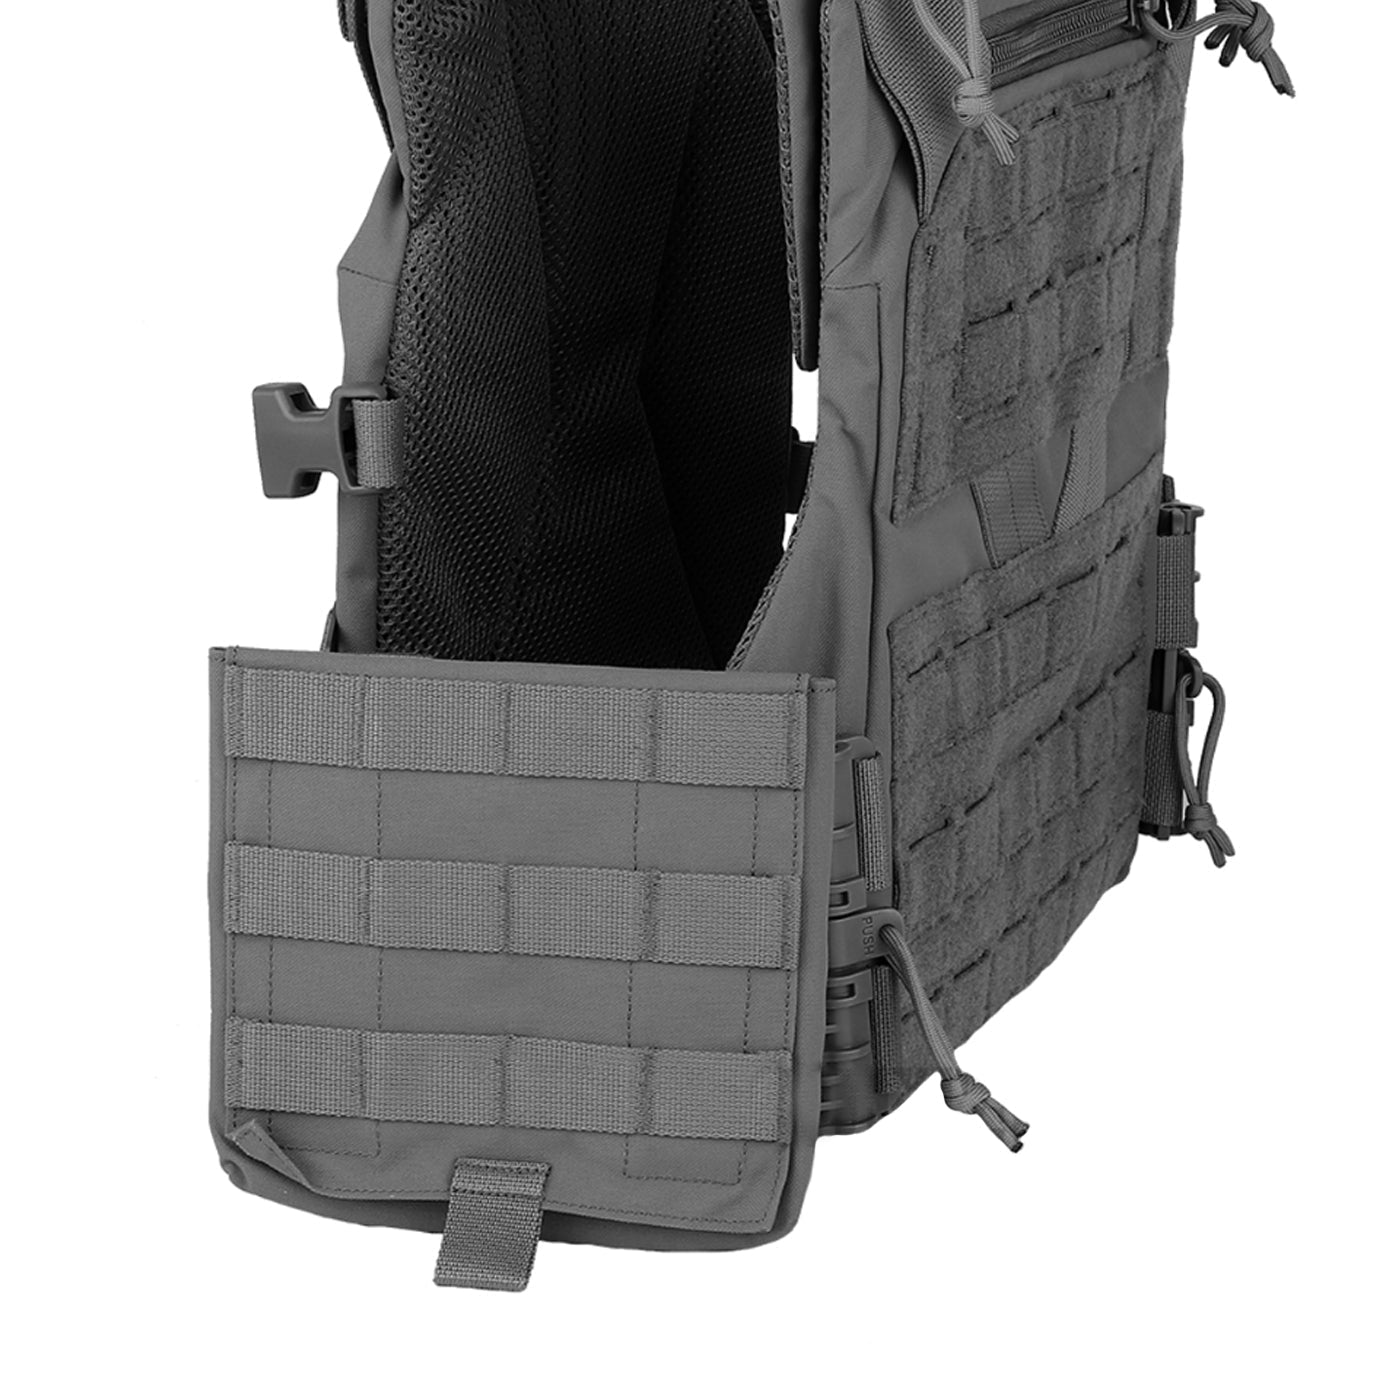 WOSPORT K19 FULL-SIZE TACTICAL PLATE CARRIER WG FROM WOSPORT